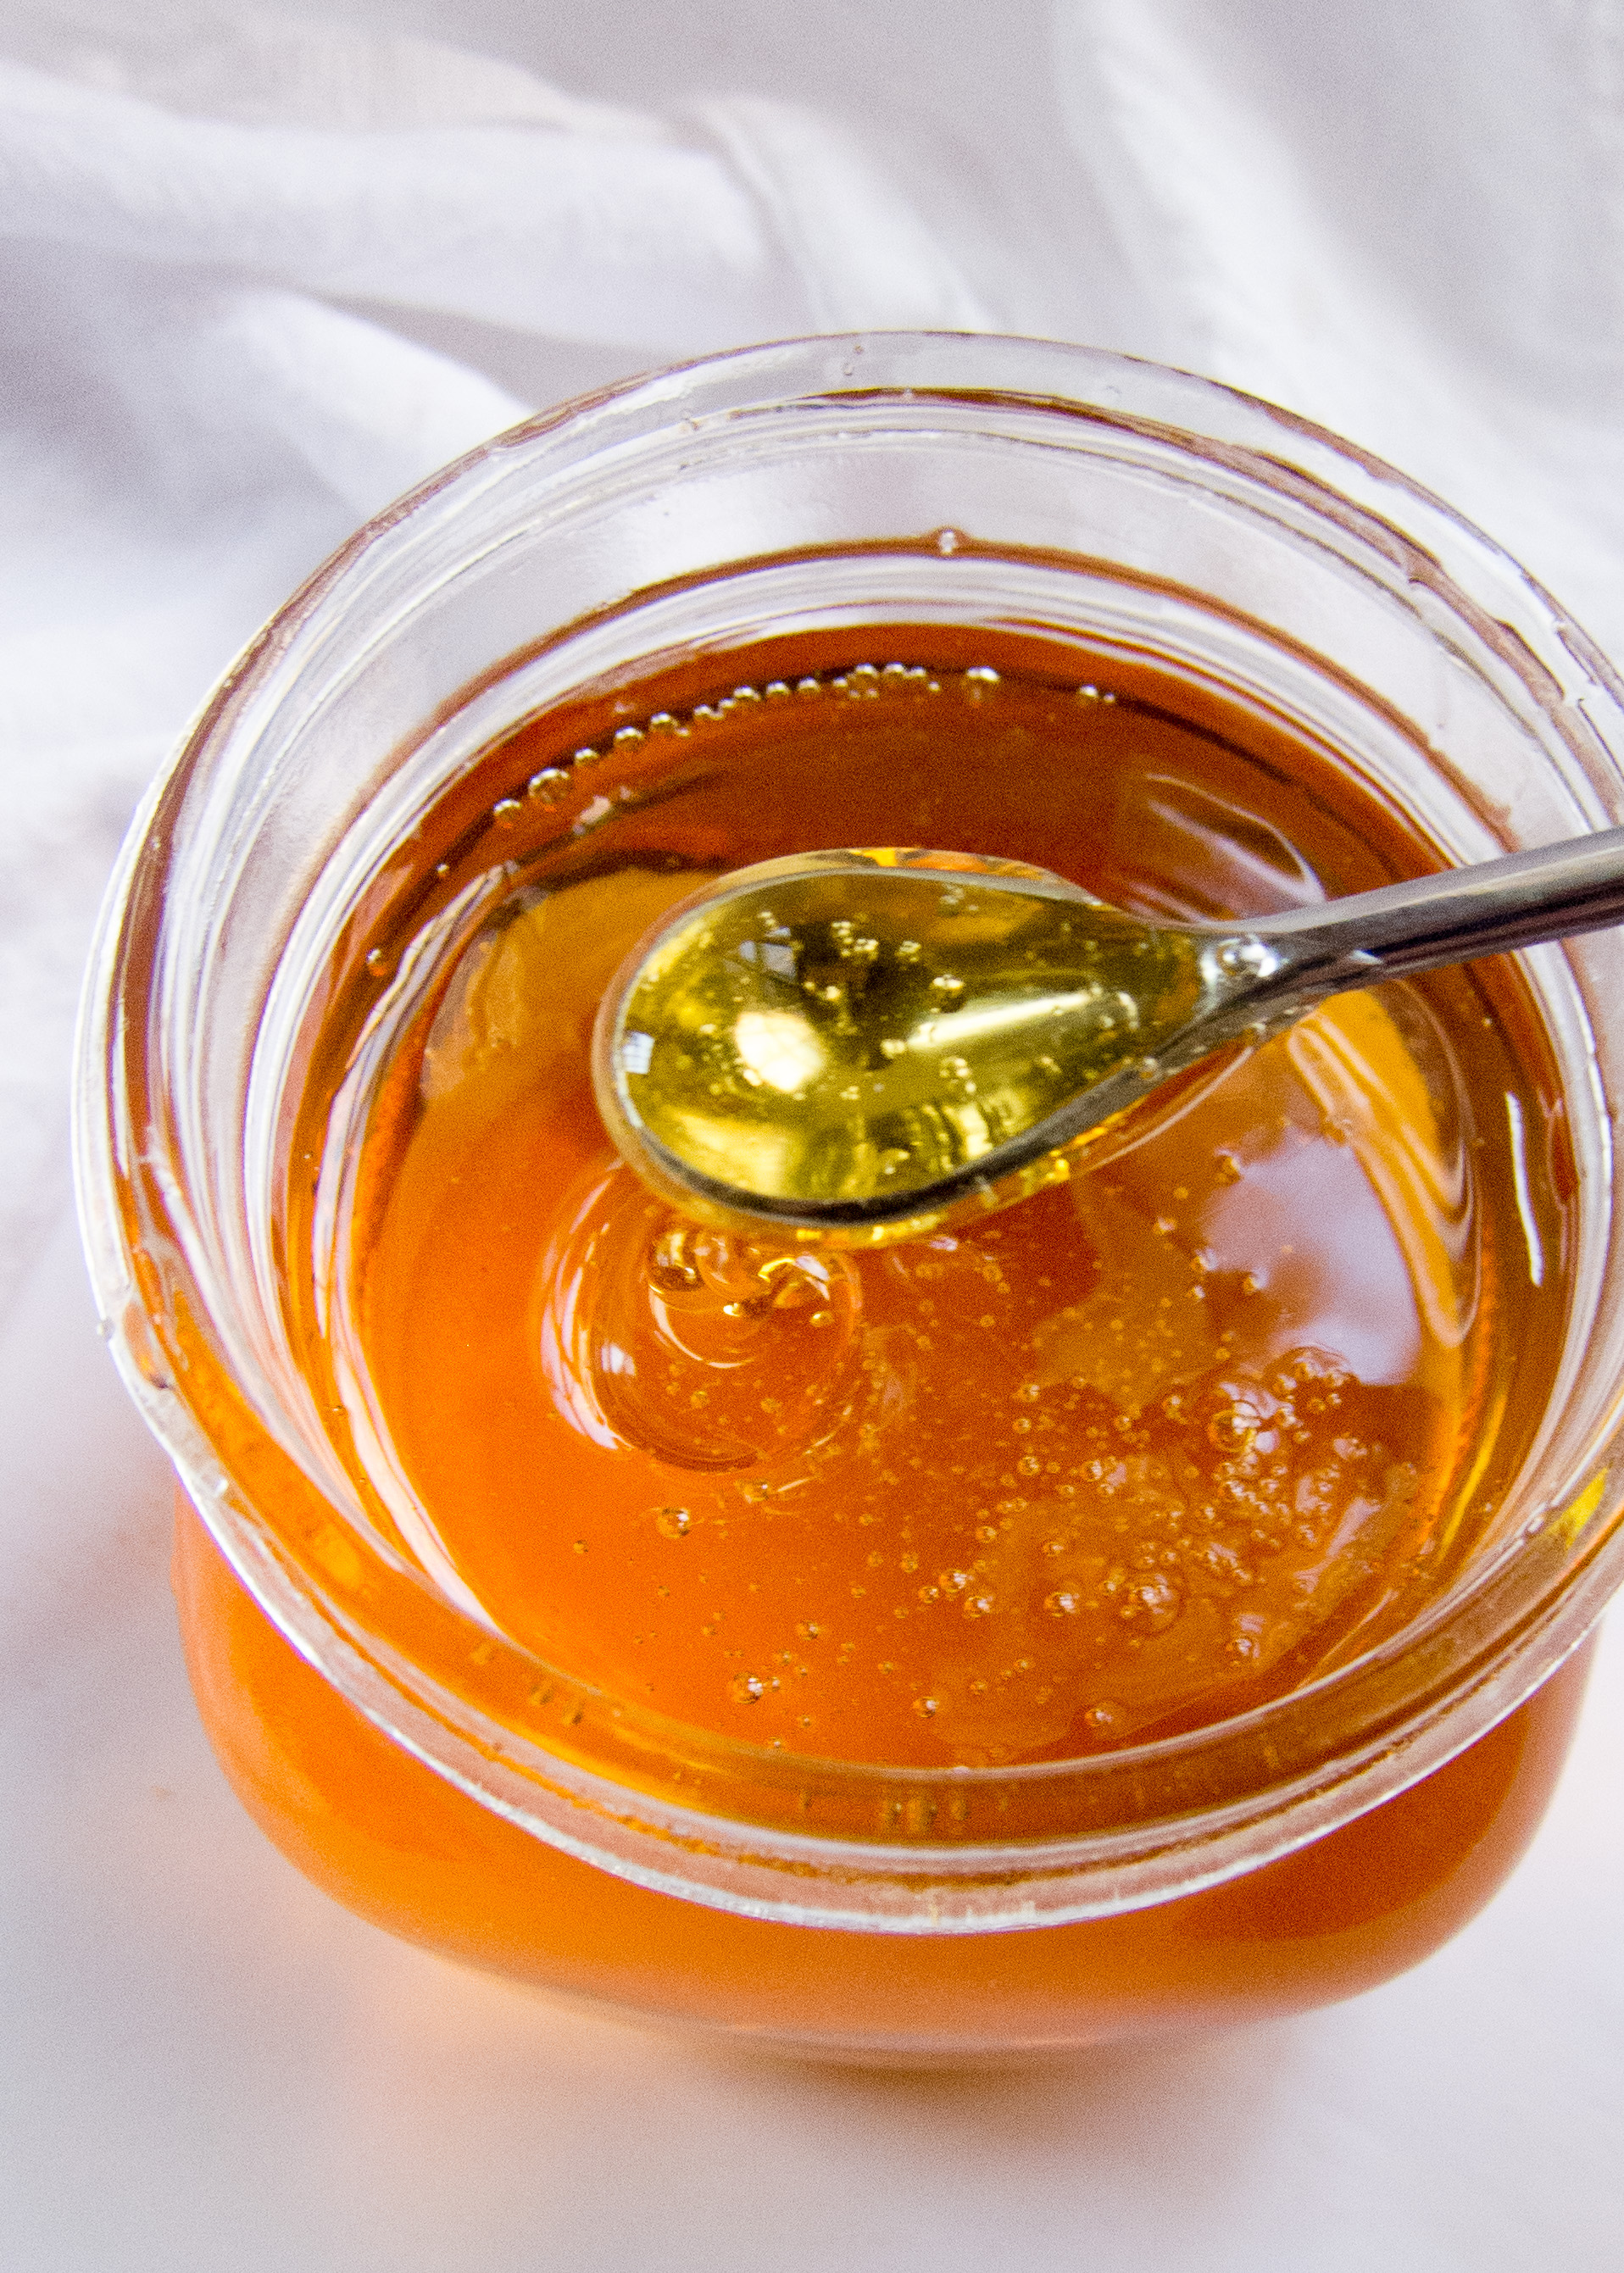 How to Make Authentic Golden Syrup - International Desserts Blog